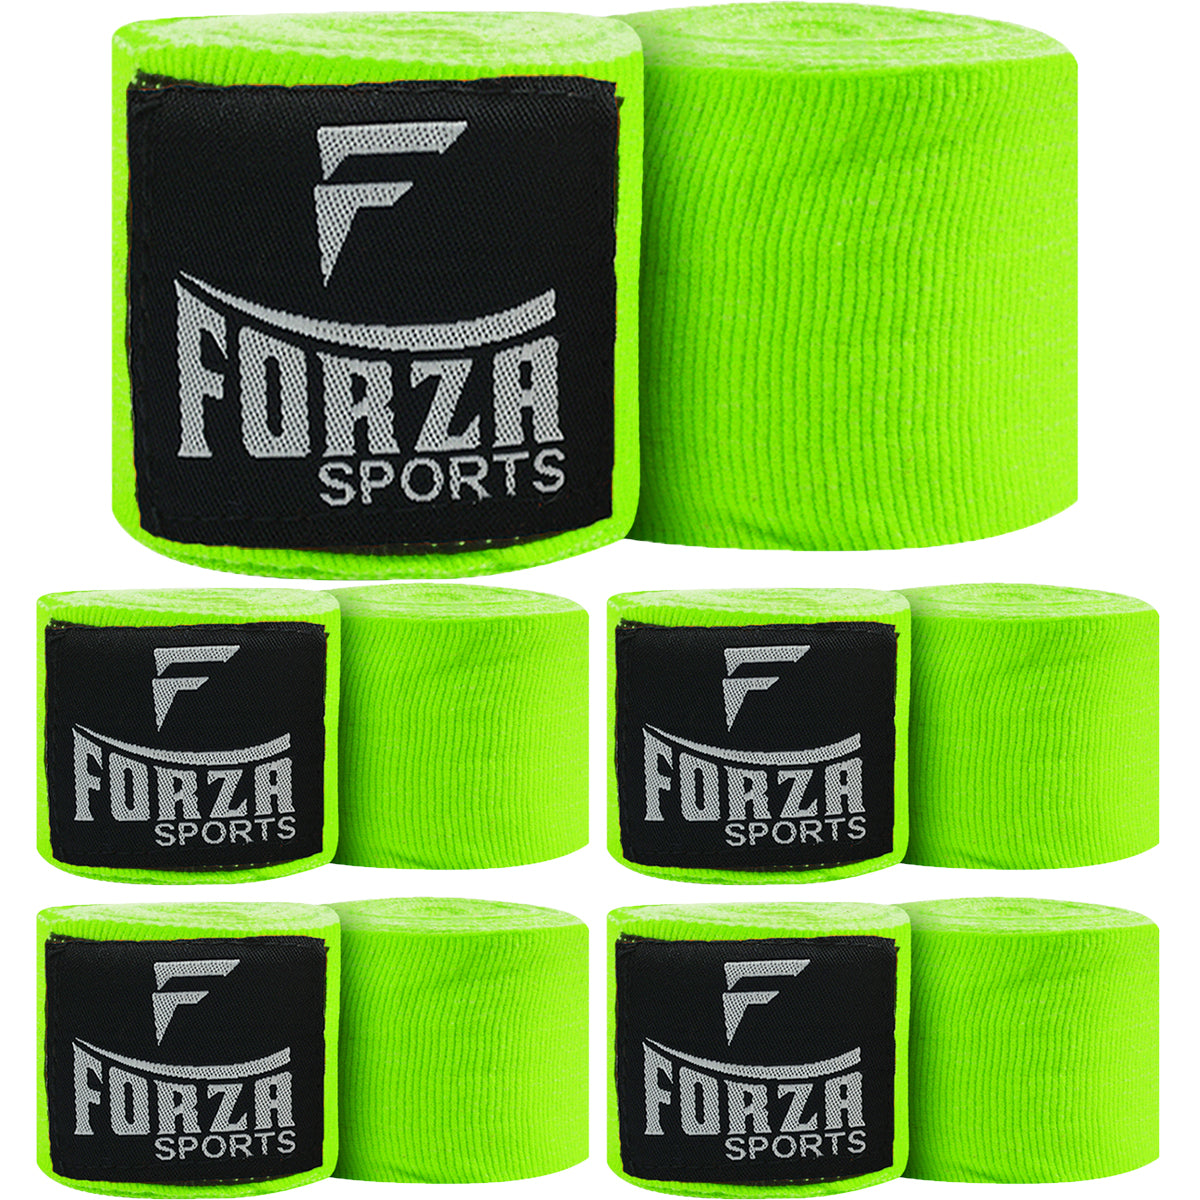 Forza Sports 180" Mexican Style Boxing and MMA Handwraps - 5-Pack Forza Sports